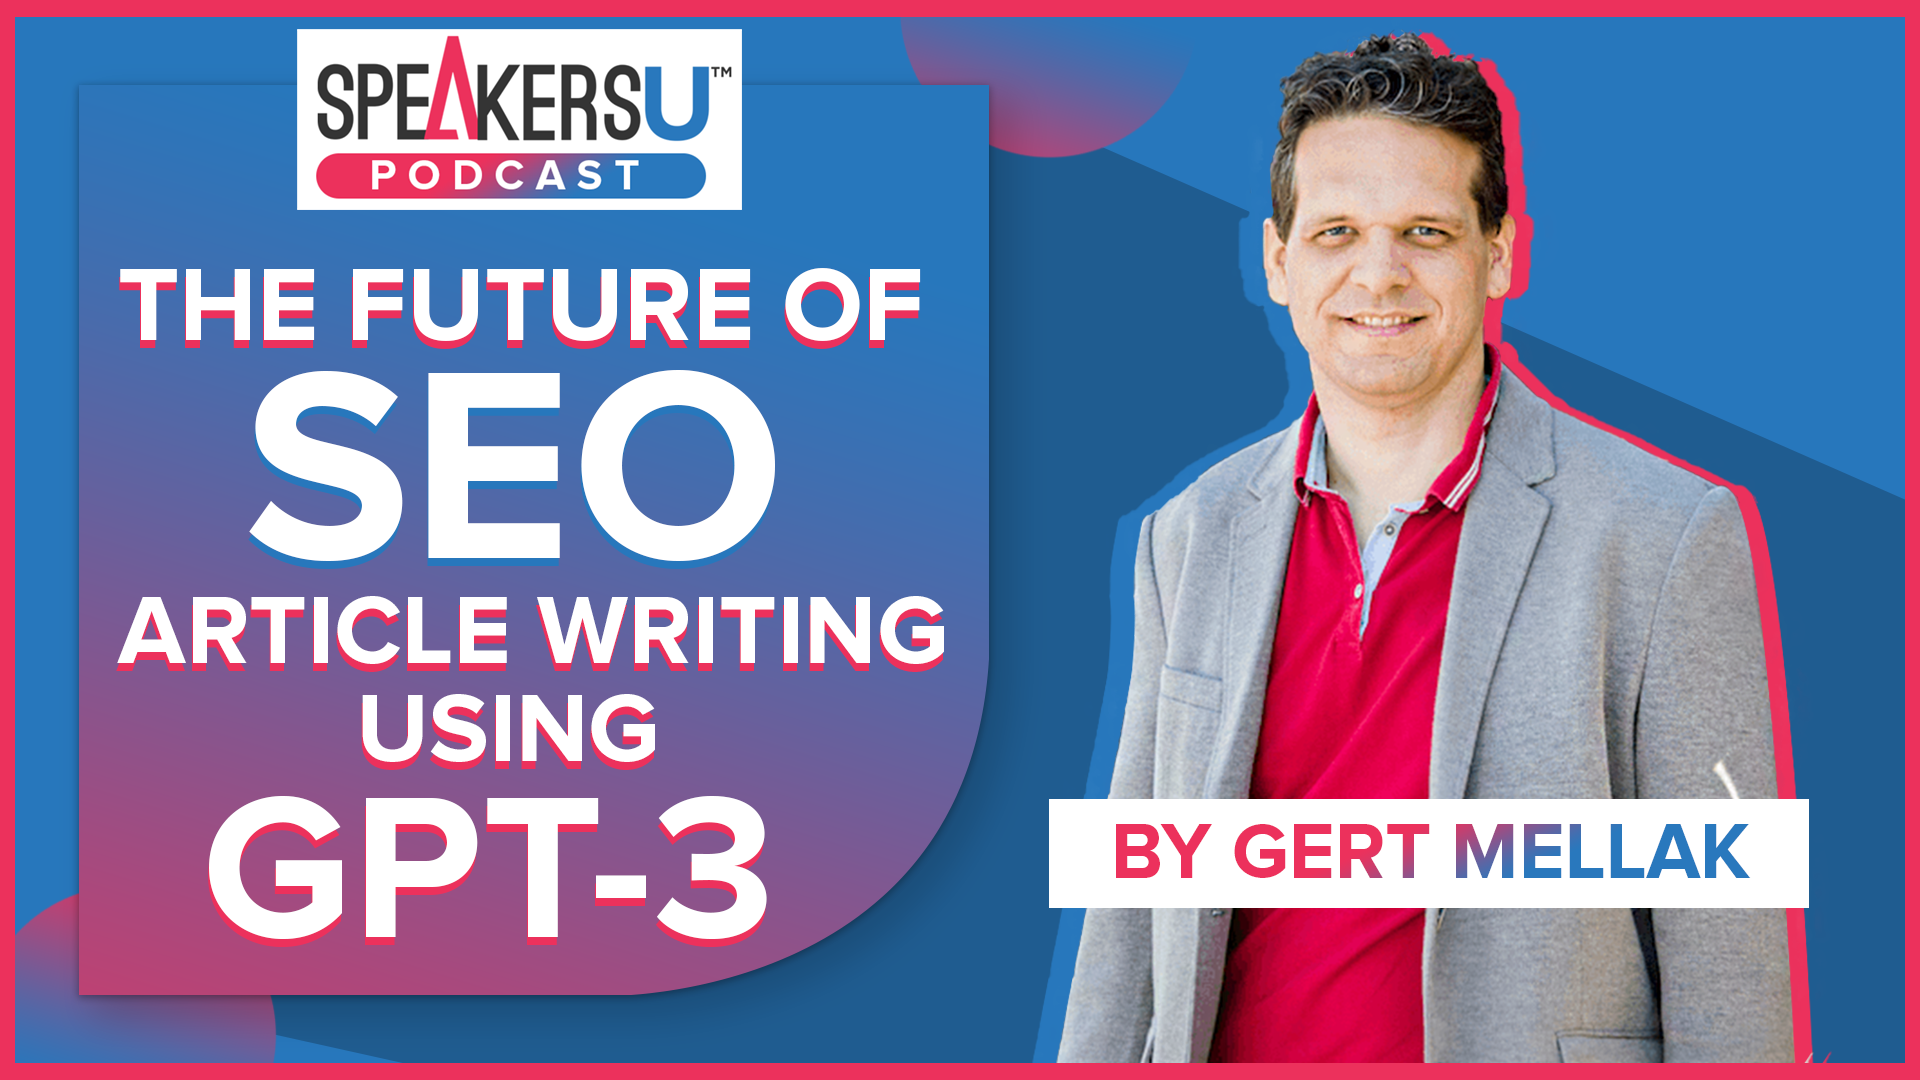 The Future of SEO Article Writing Using GPT-3